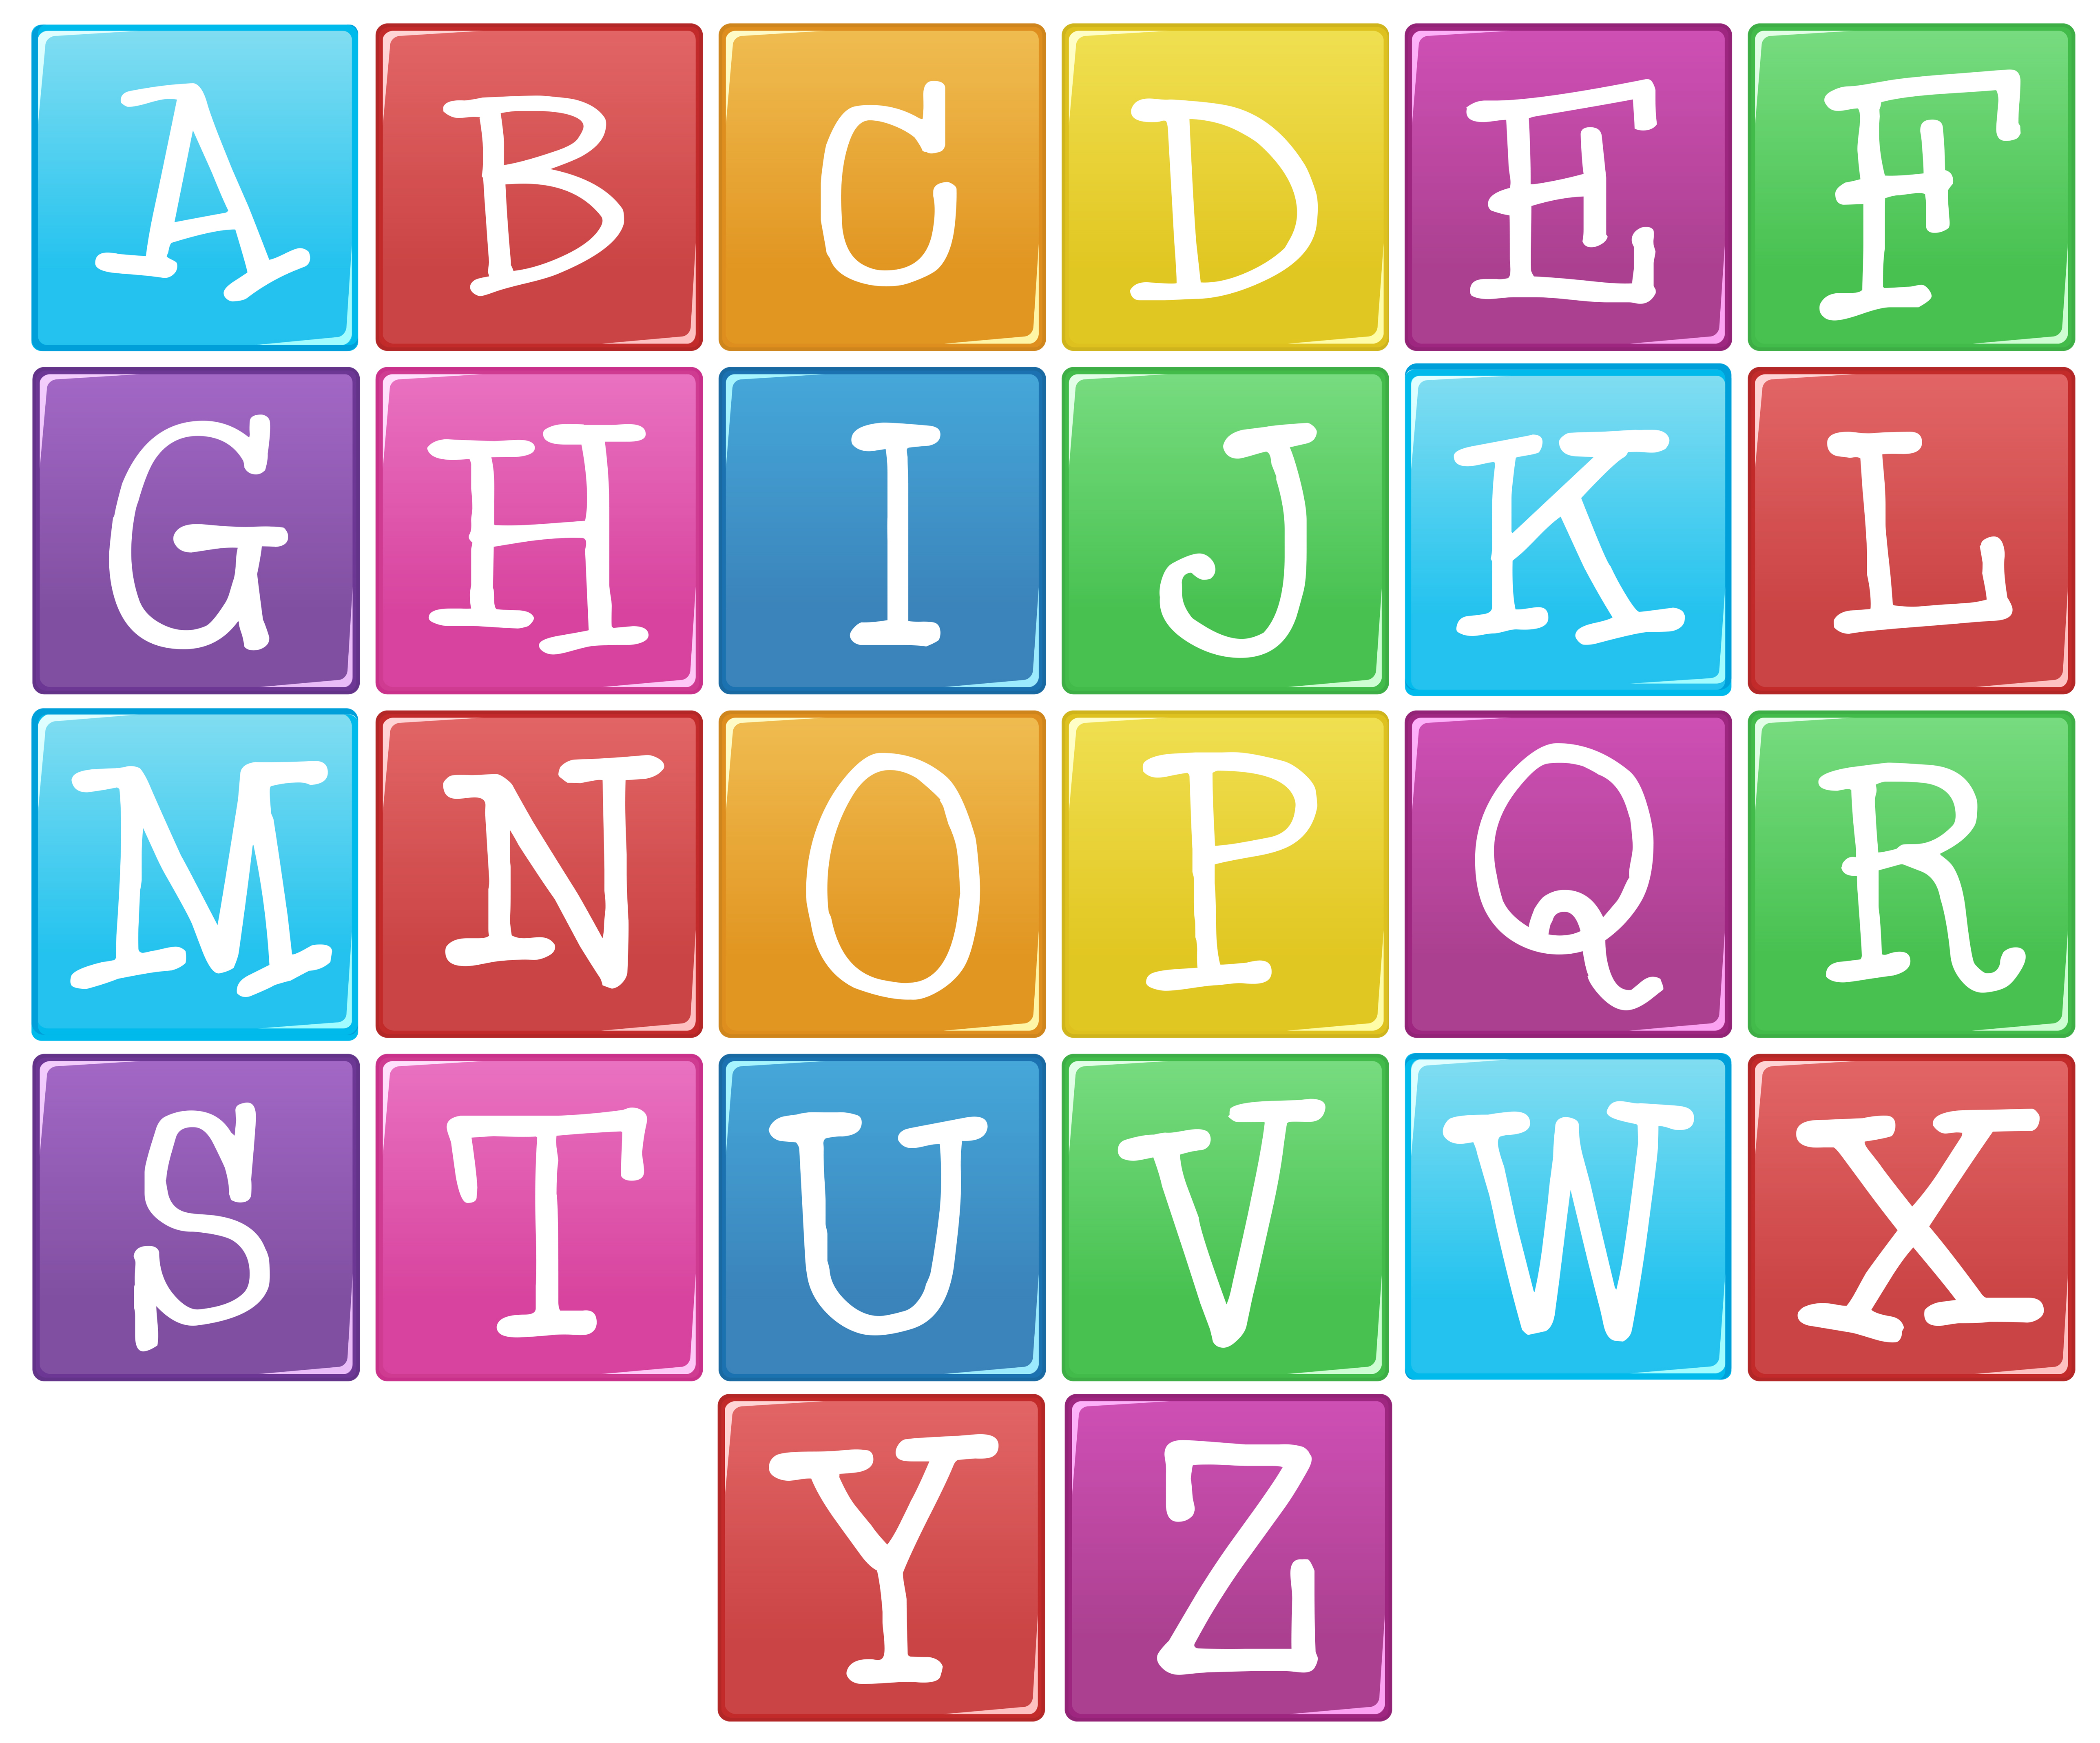 1-alphabet-in-english-a-to-z-are-26-letters-of-the-english-alphabet